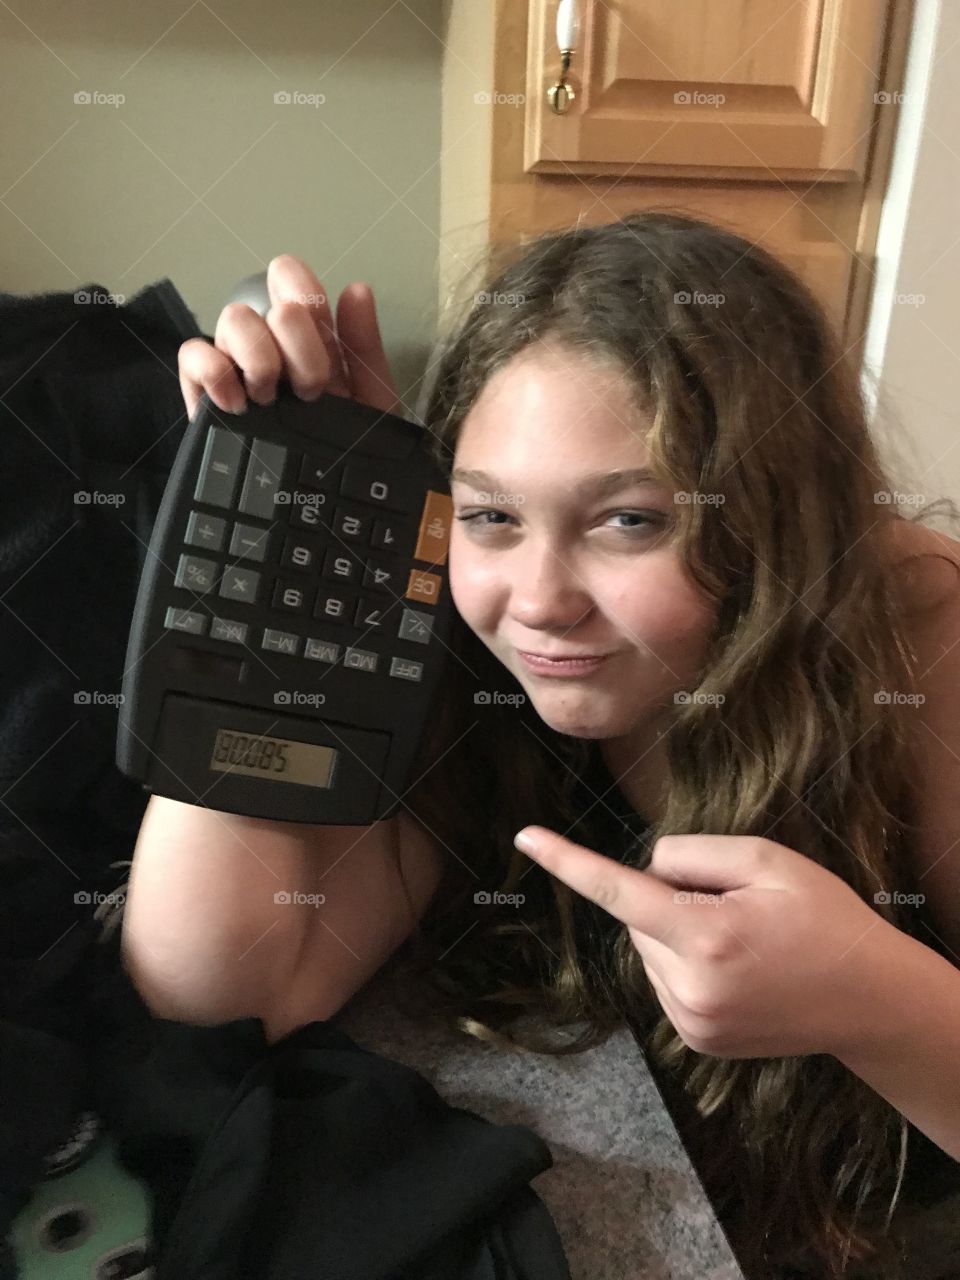 My daughter when she discovered that she could use the calculator to spell the word BOOBS. 😂